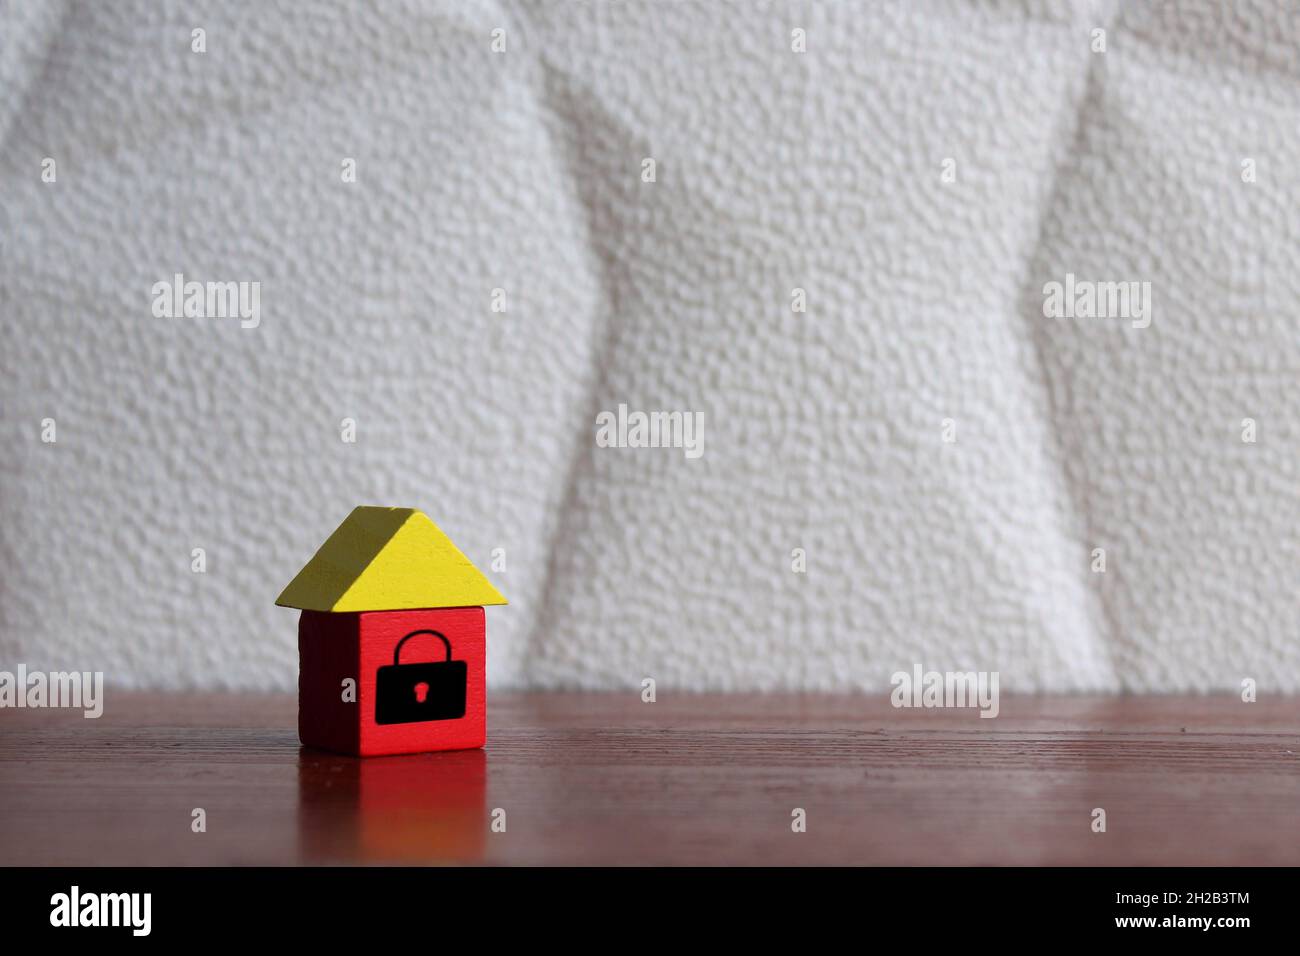 Security, safety and house insurance concept. Wooden house with padlock icon on table. Copy space for text. Stock Photo